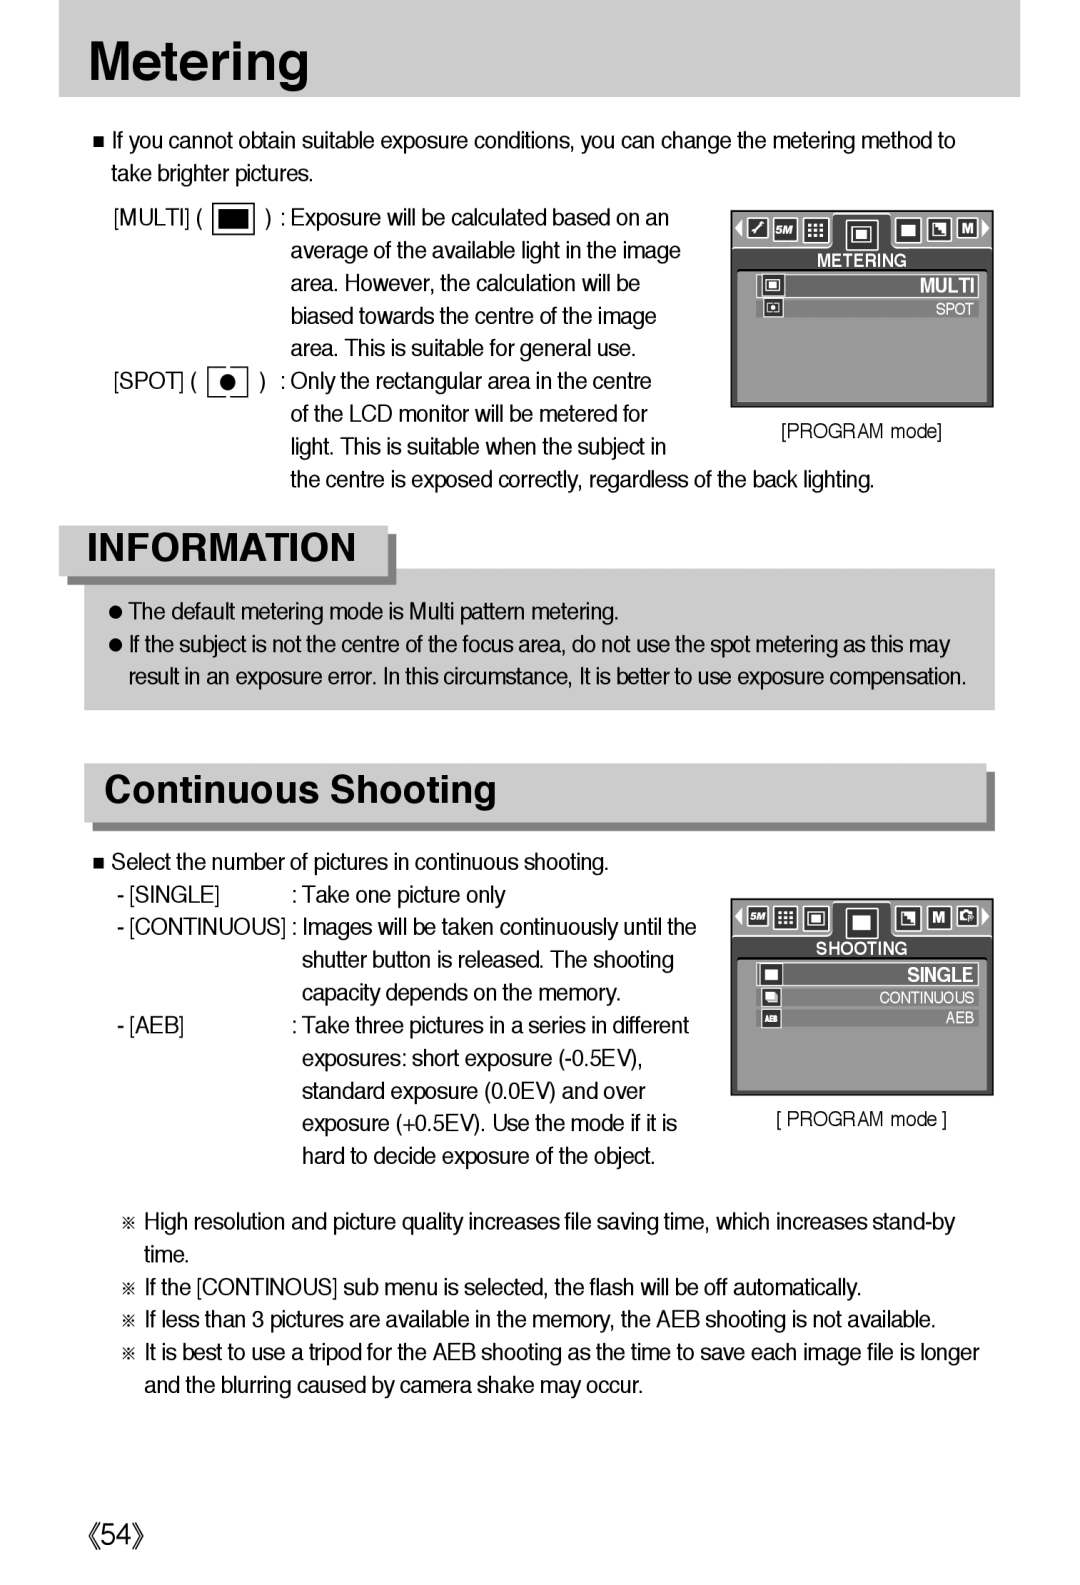 Samsung L50 user manual Metering, Continuous Shooting, 《54》, Information 